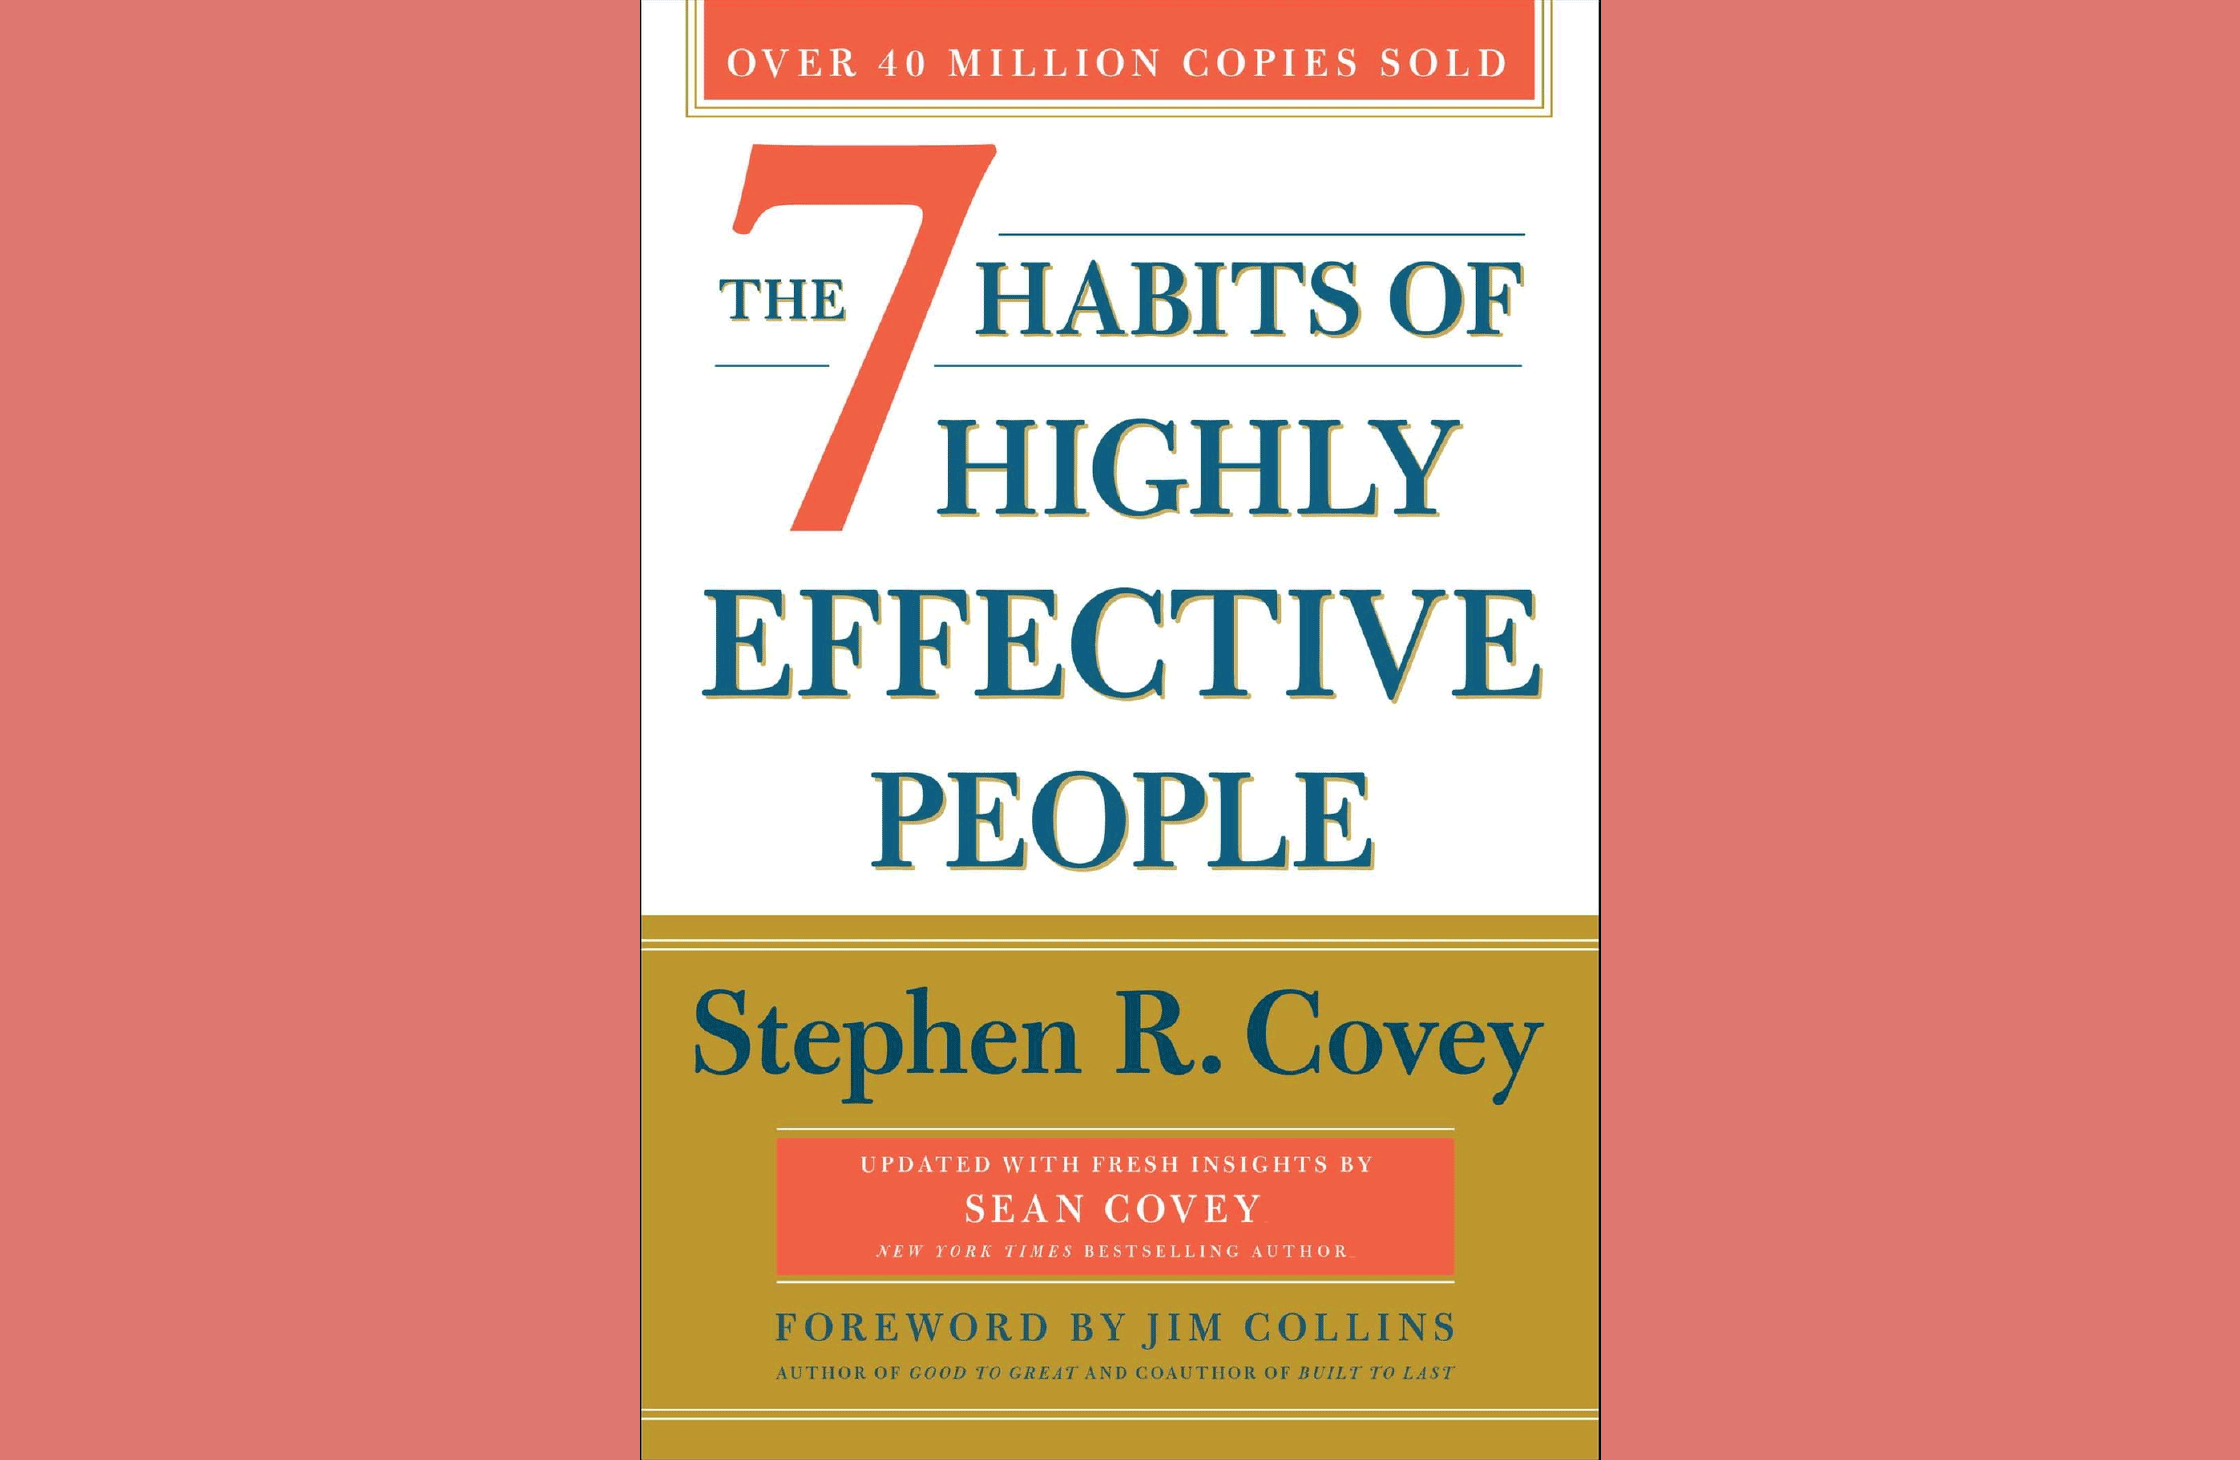 Summary: The 7 Habits of Highly Effective People by Stephen R. Covey